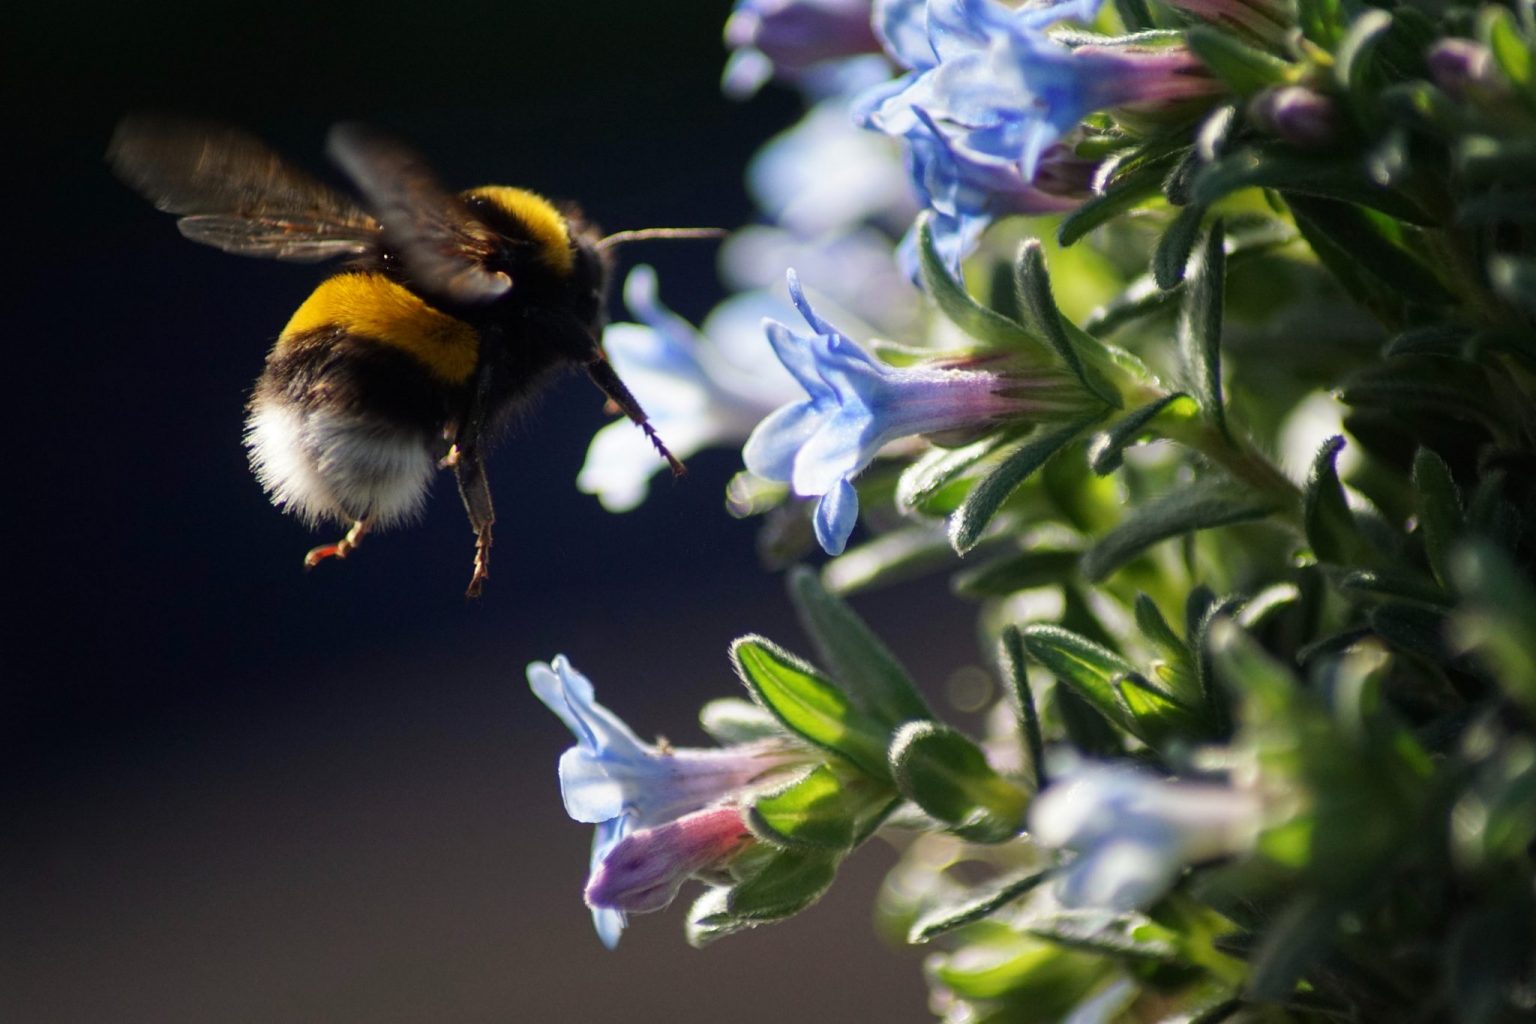 Close-up photo of a bumblebee approaching a blue flower.